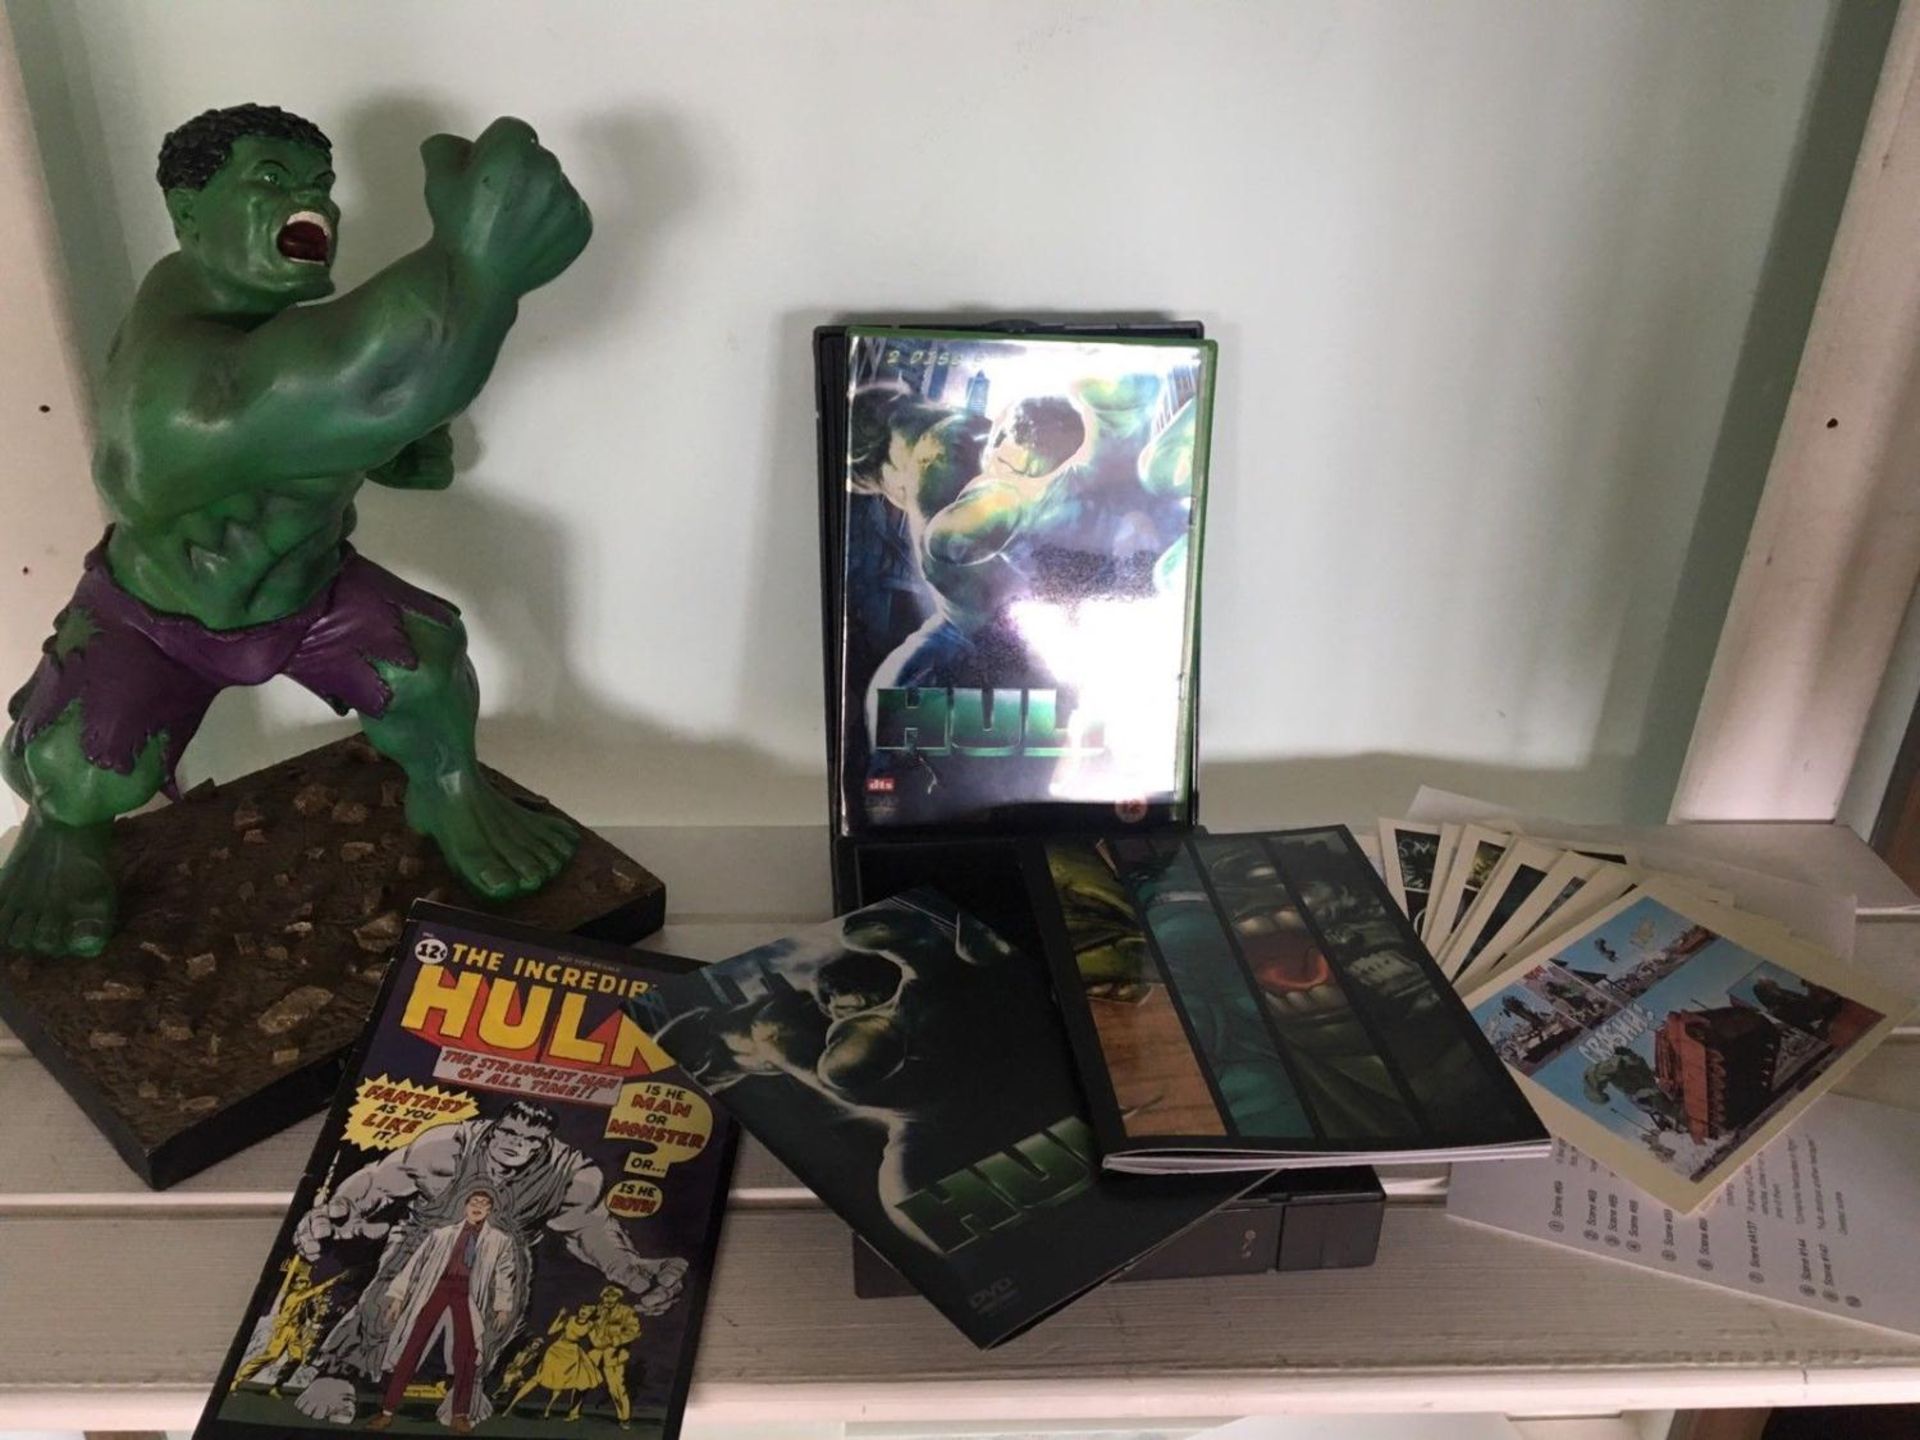 Limited Edition HULK Movie Box Set DVD with large rare statue Marvel 2003 - Image 2 of 3